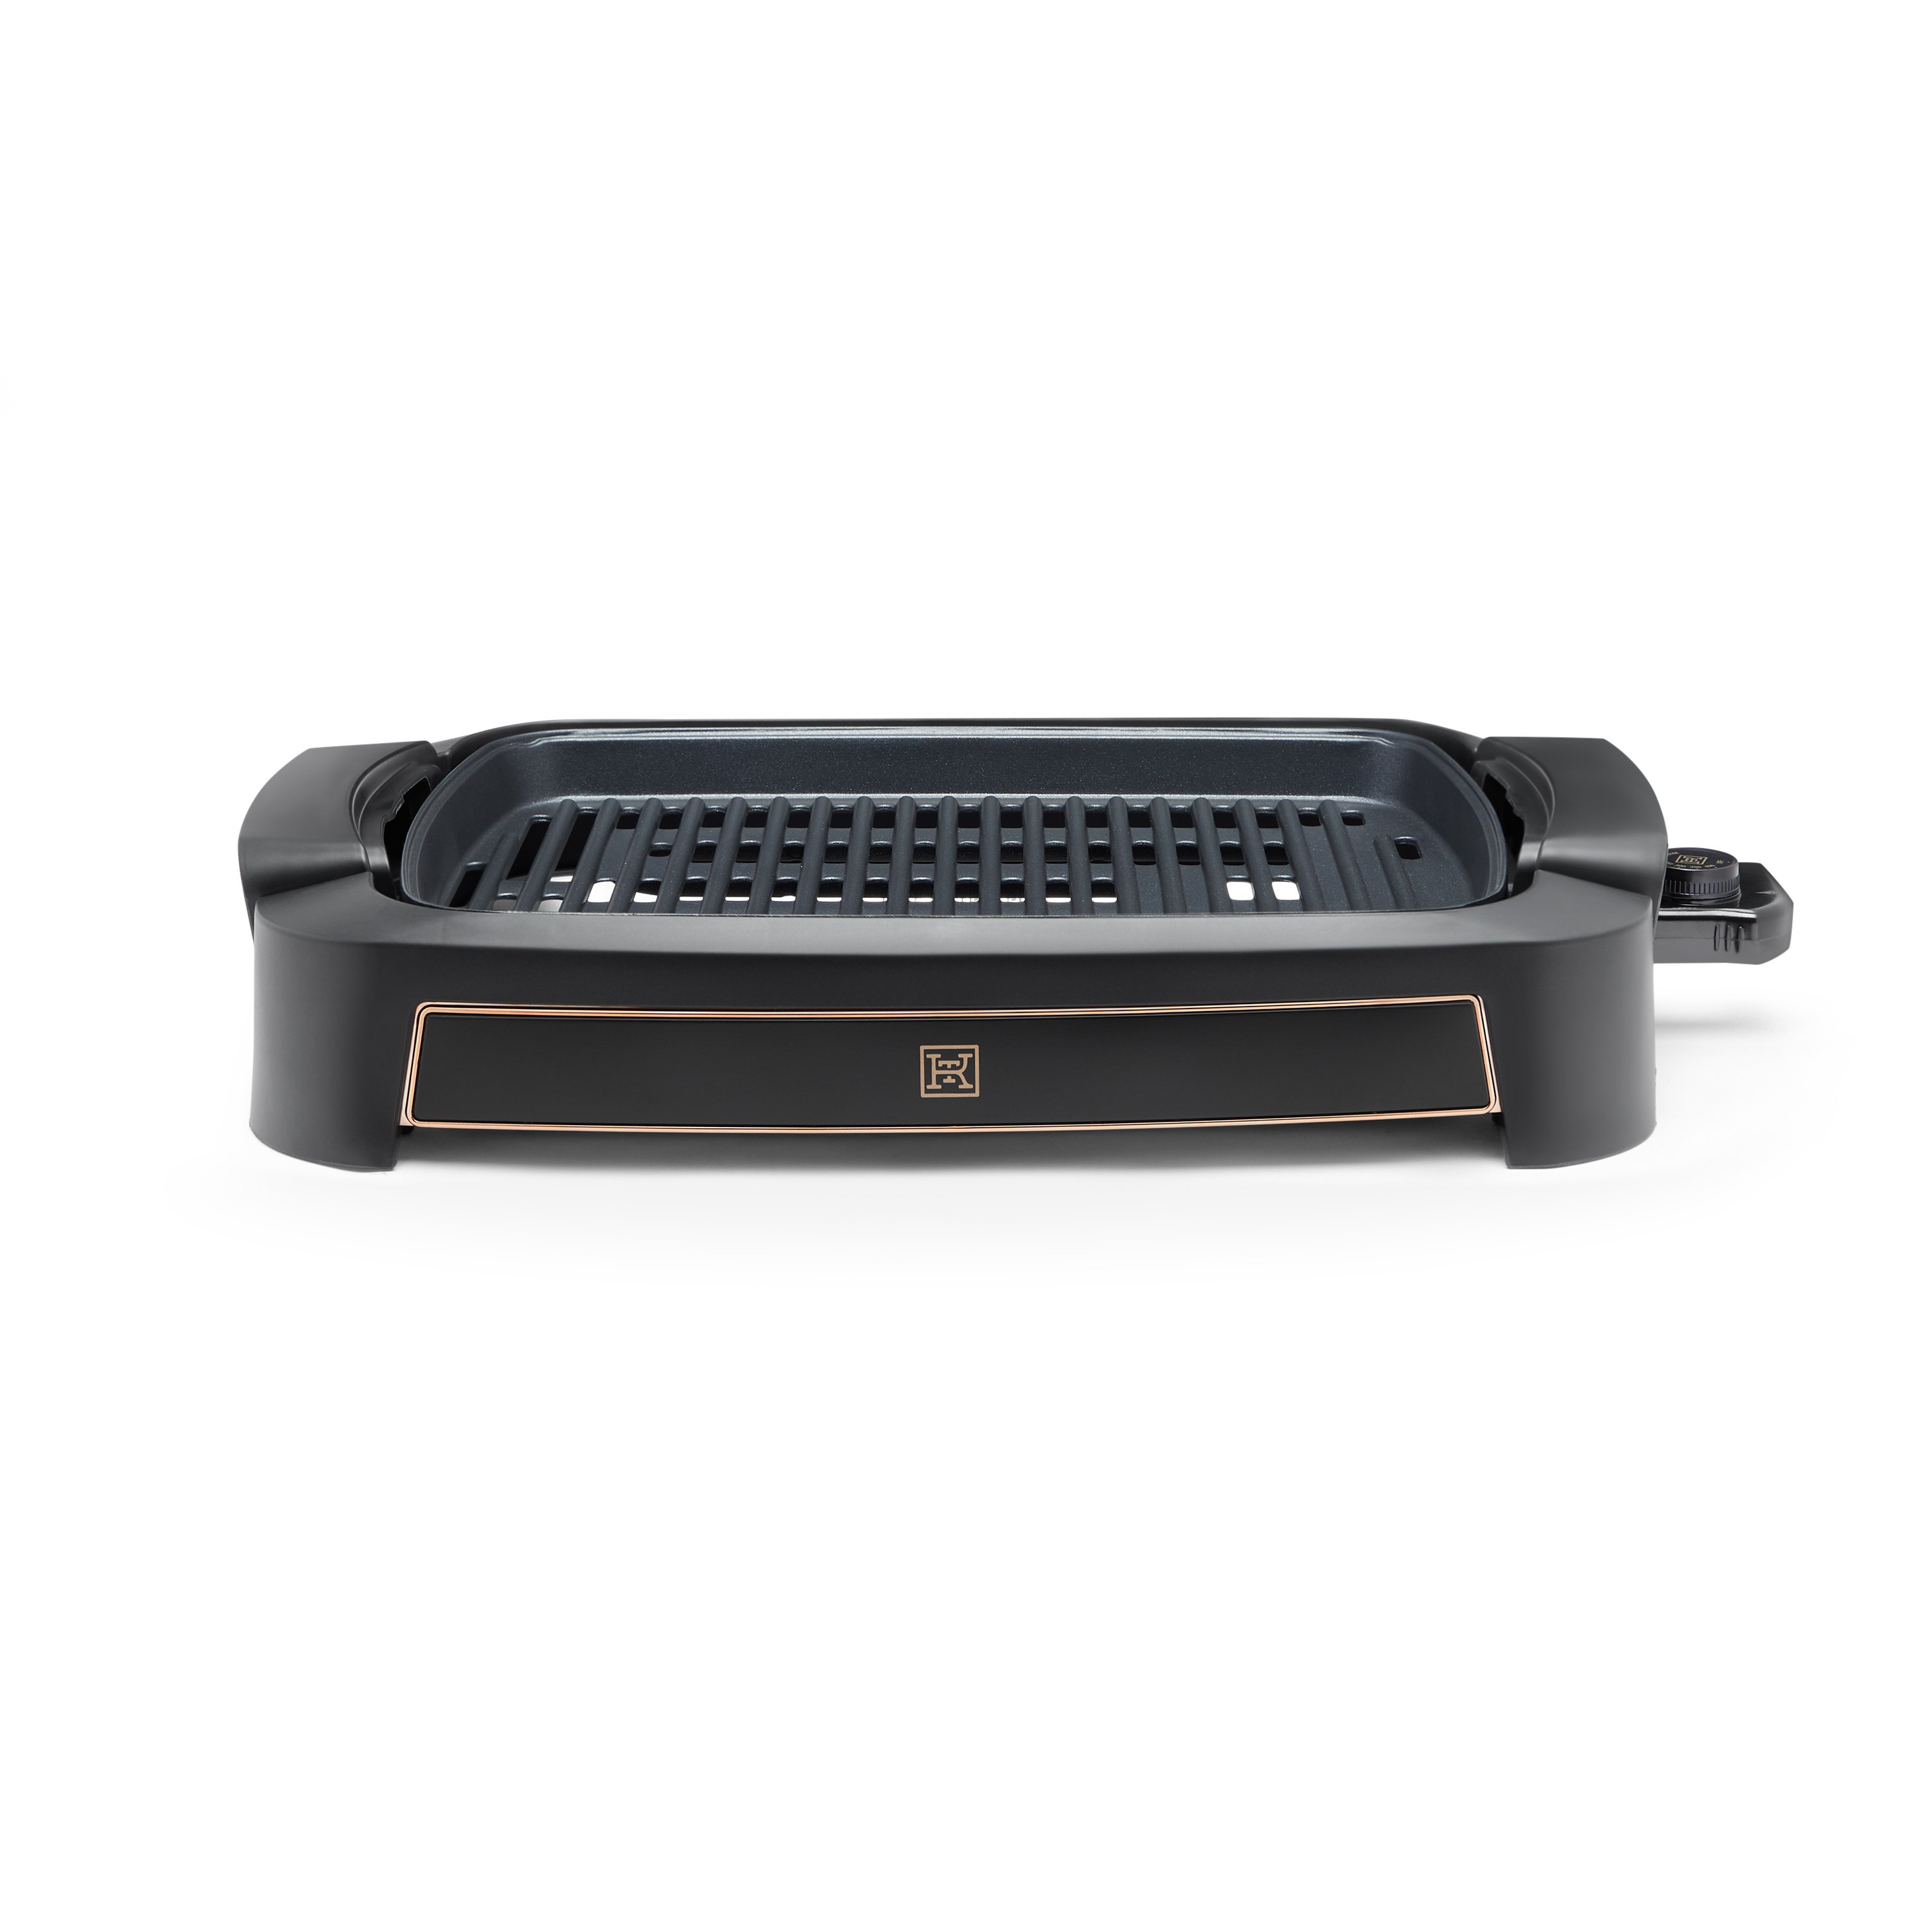 Indoor Grill, Smokeless Grill Indoor, 1500W Korean BBQ Grill, Electric Grill  Griddle with LED Smart Display & Tempered Glass Lid - Bed Bath & Beyond -  39699537